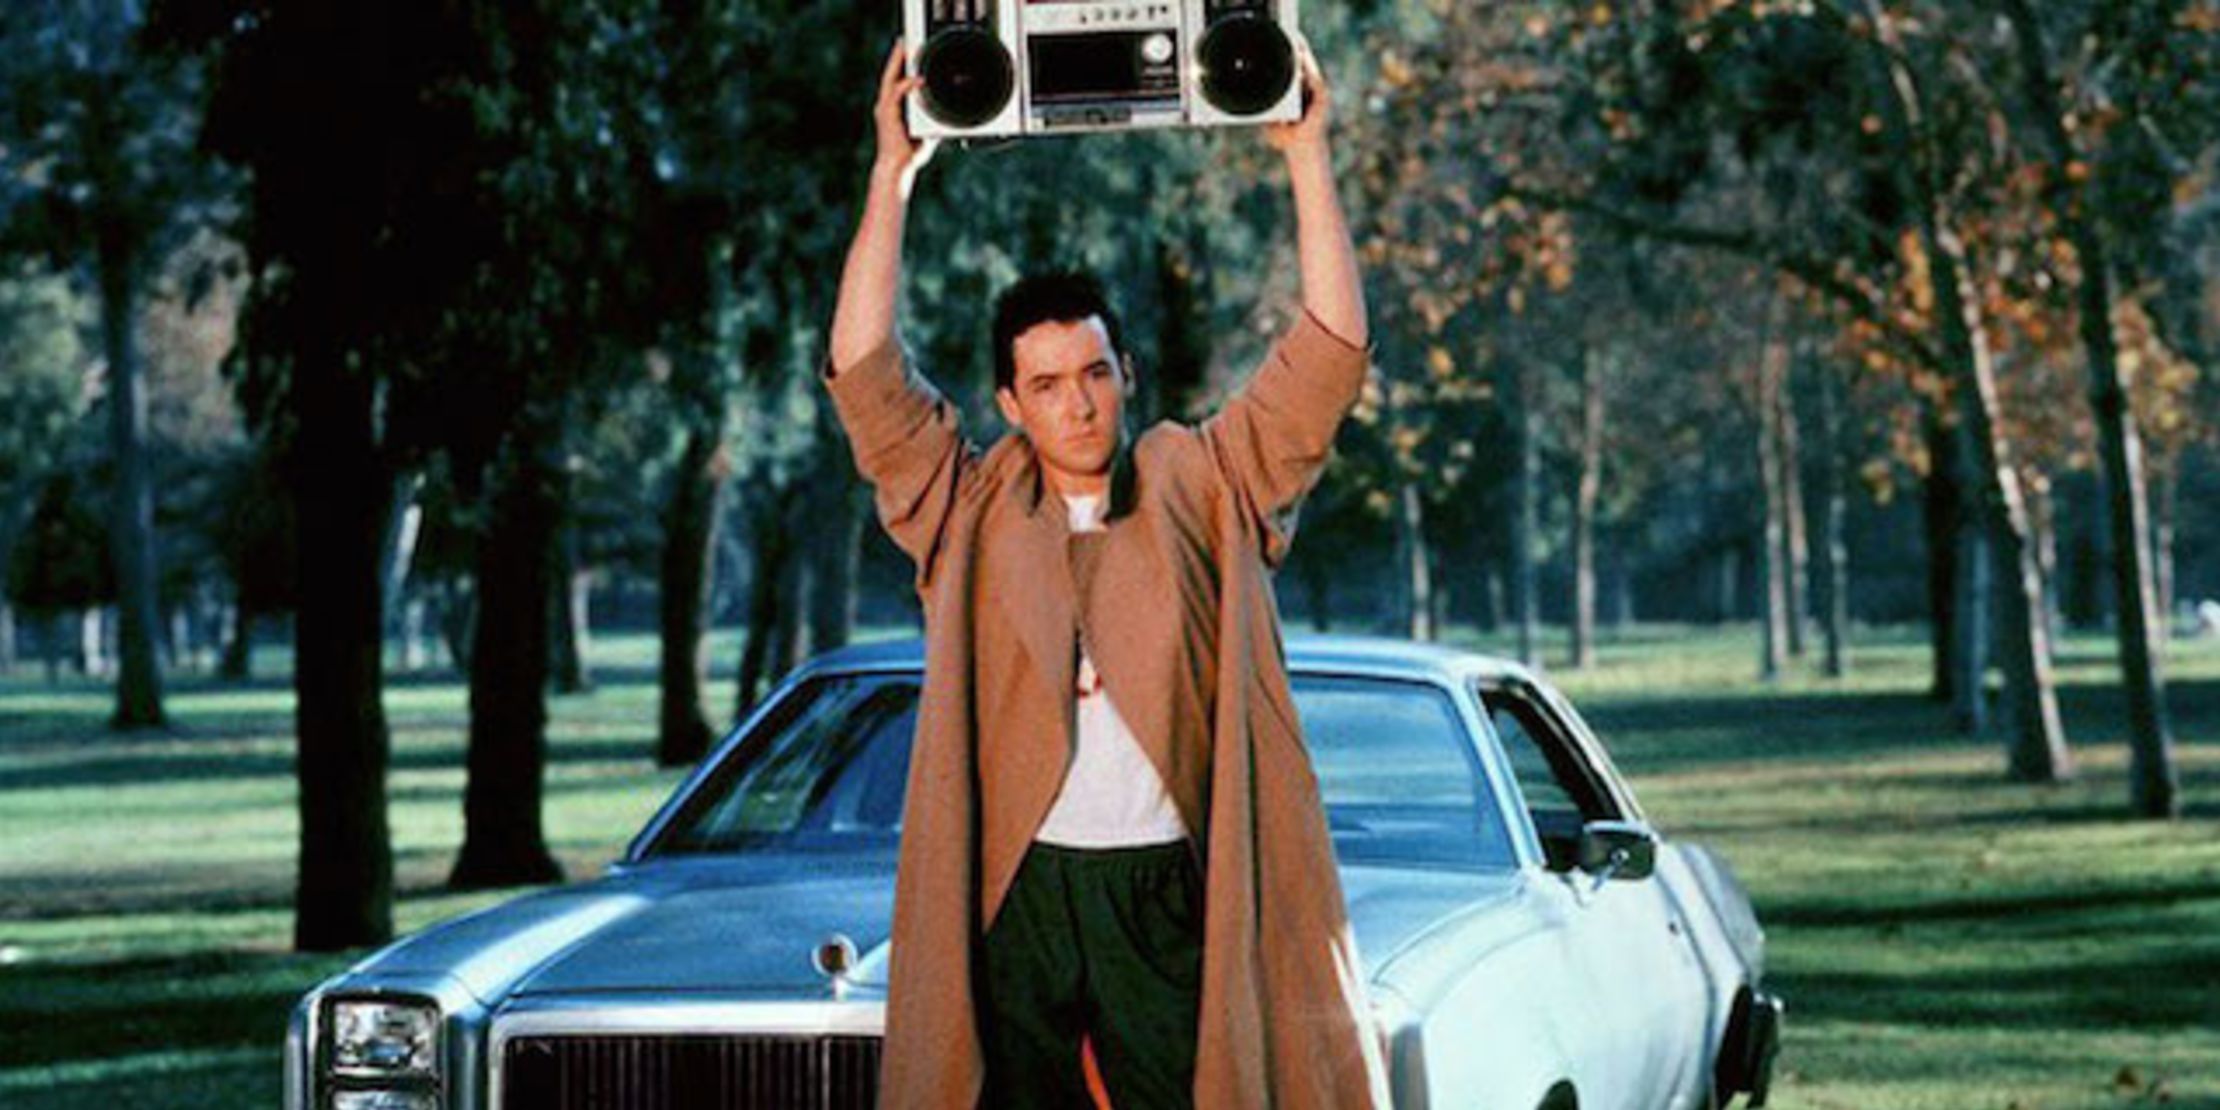 Lloyd lifting a boombox in Say Anything